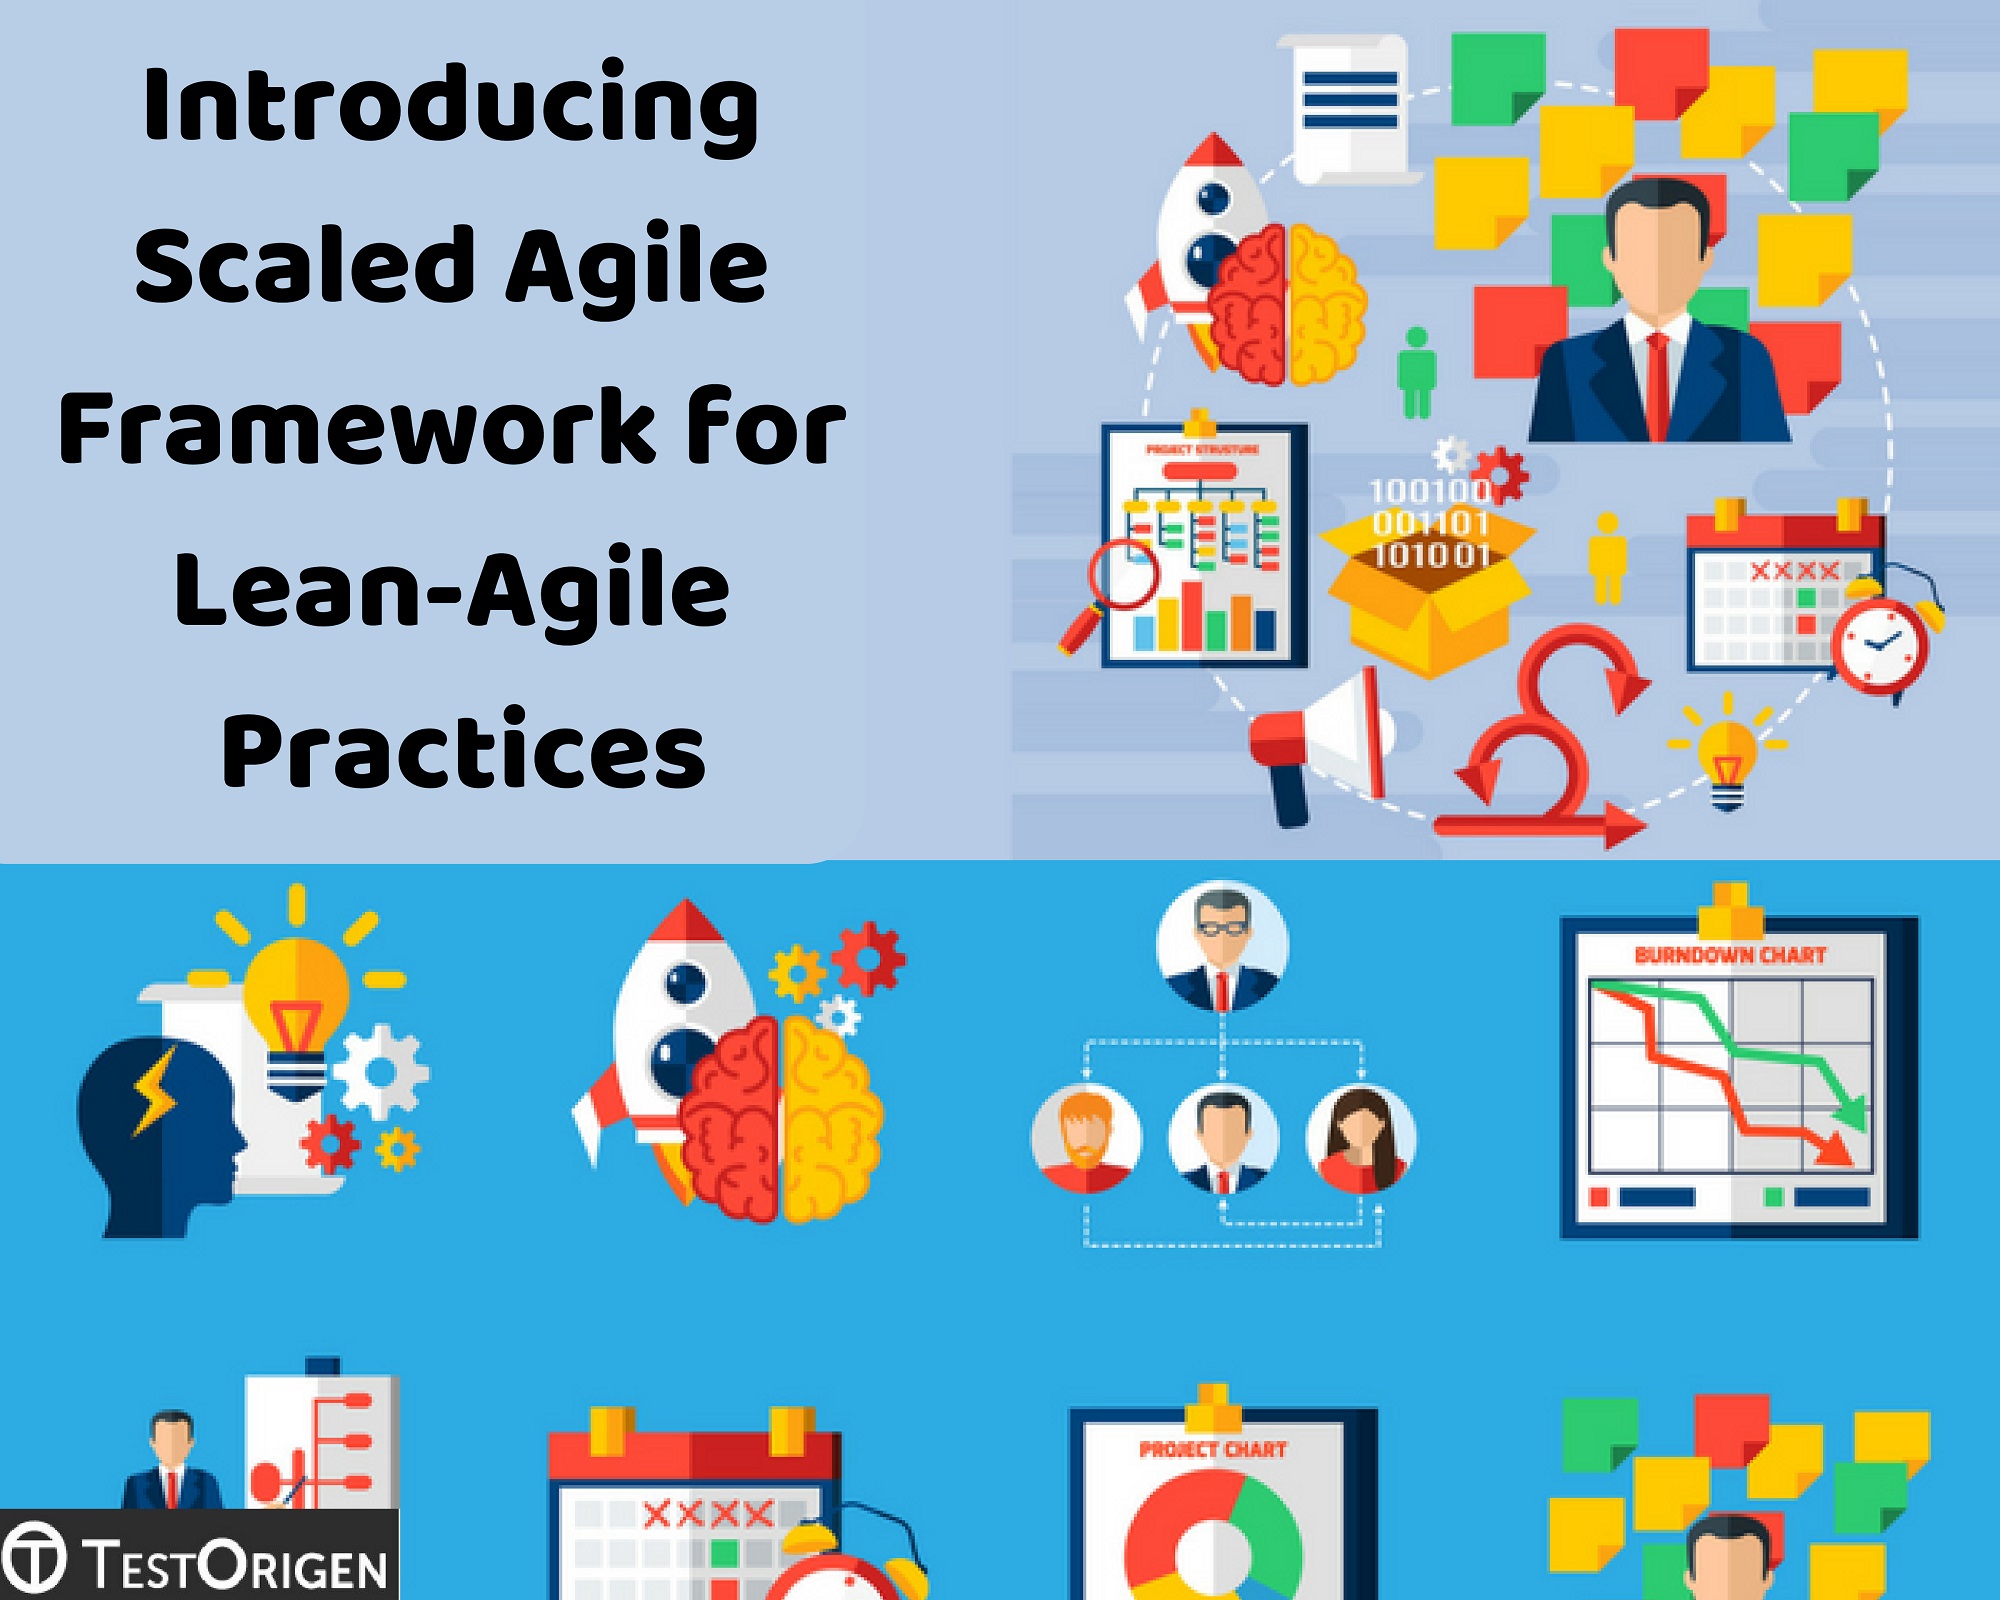 Introducing Scaled Agile Framework for Lean-Agile Practices